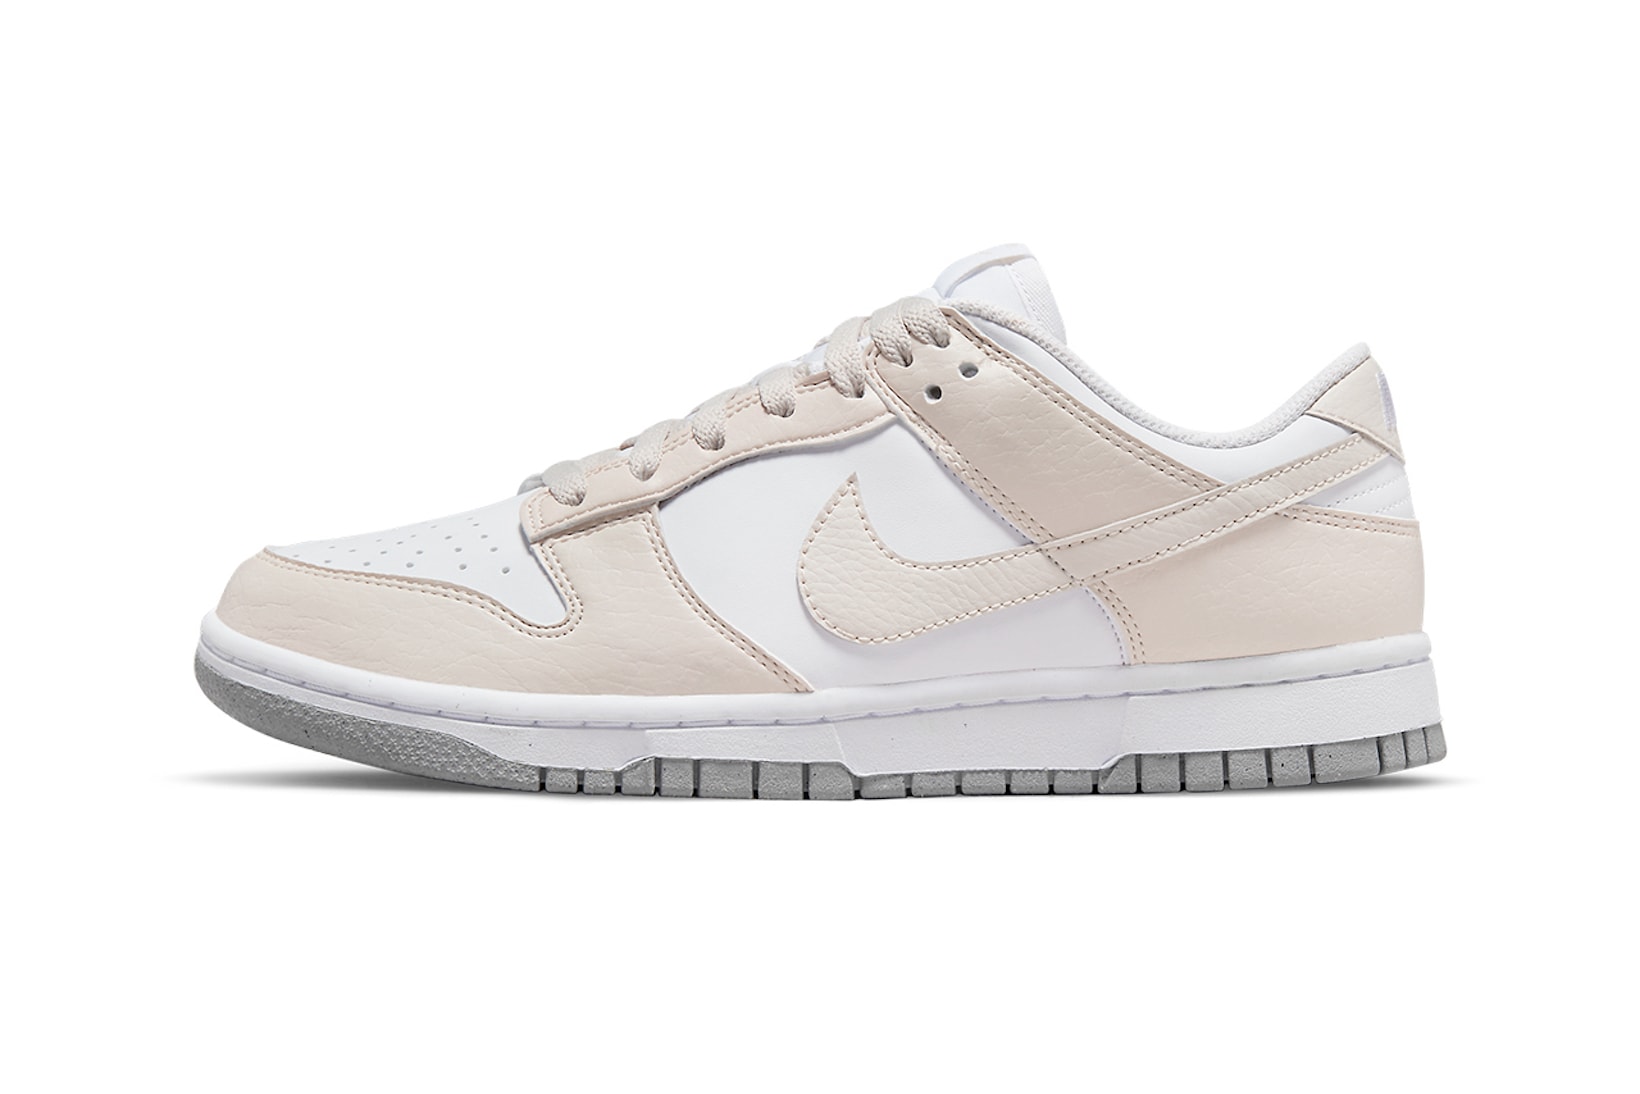 nike dunk low move to zero cream white gray sustainable footwear shoes kicks lateral